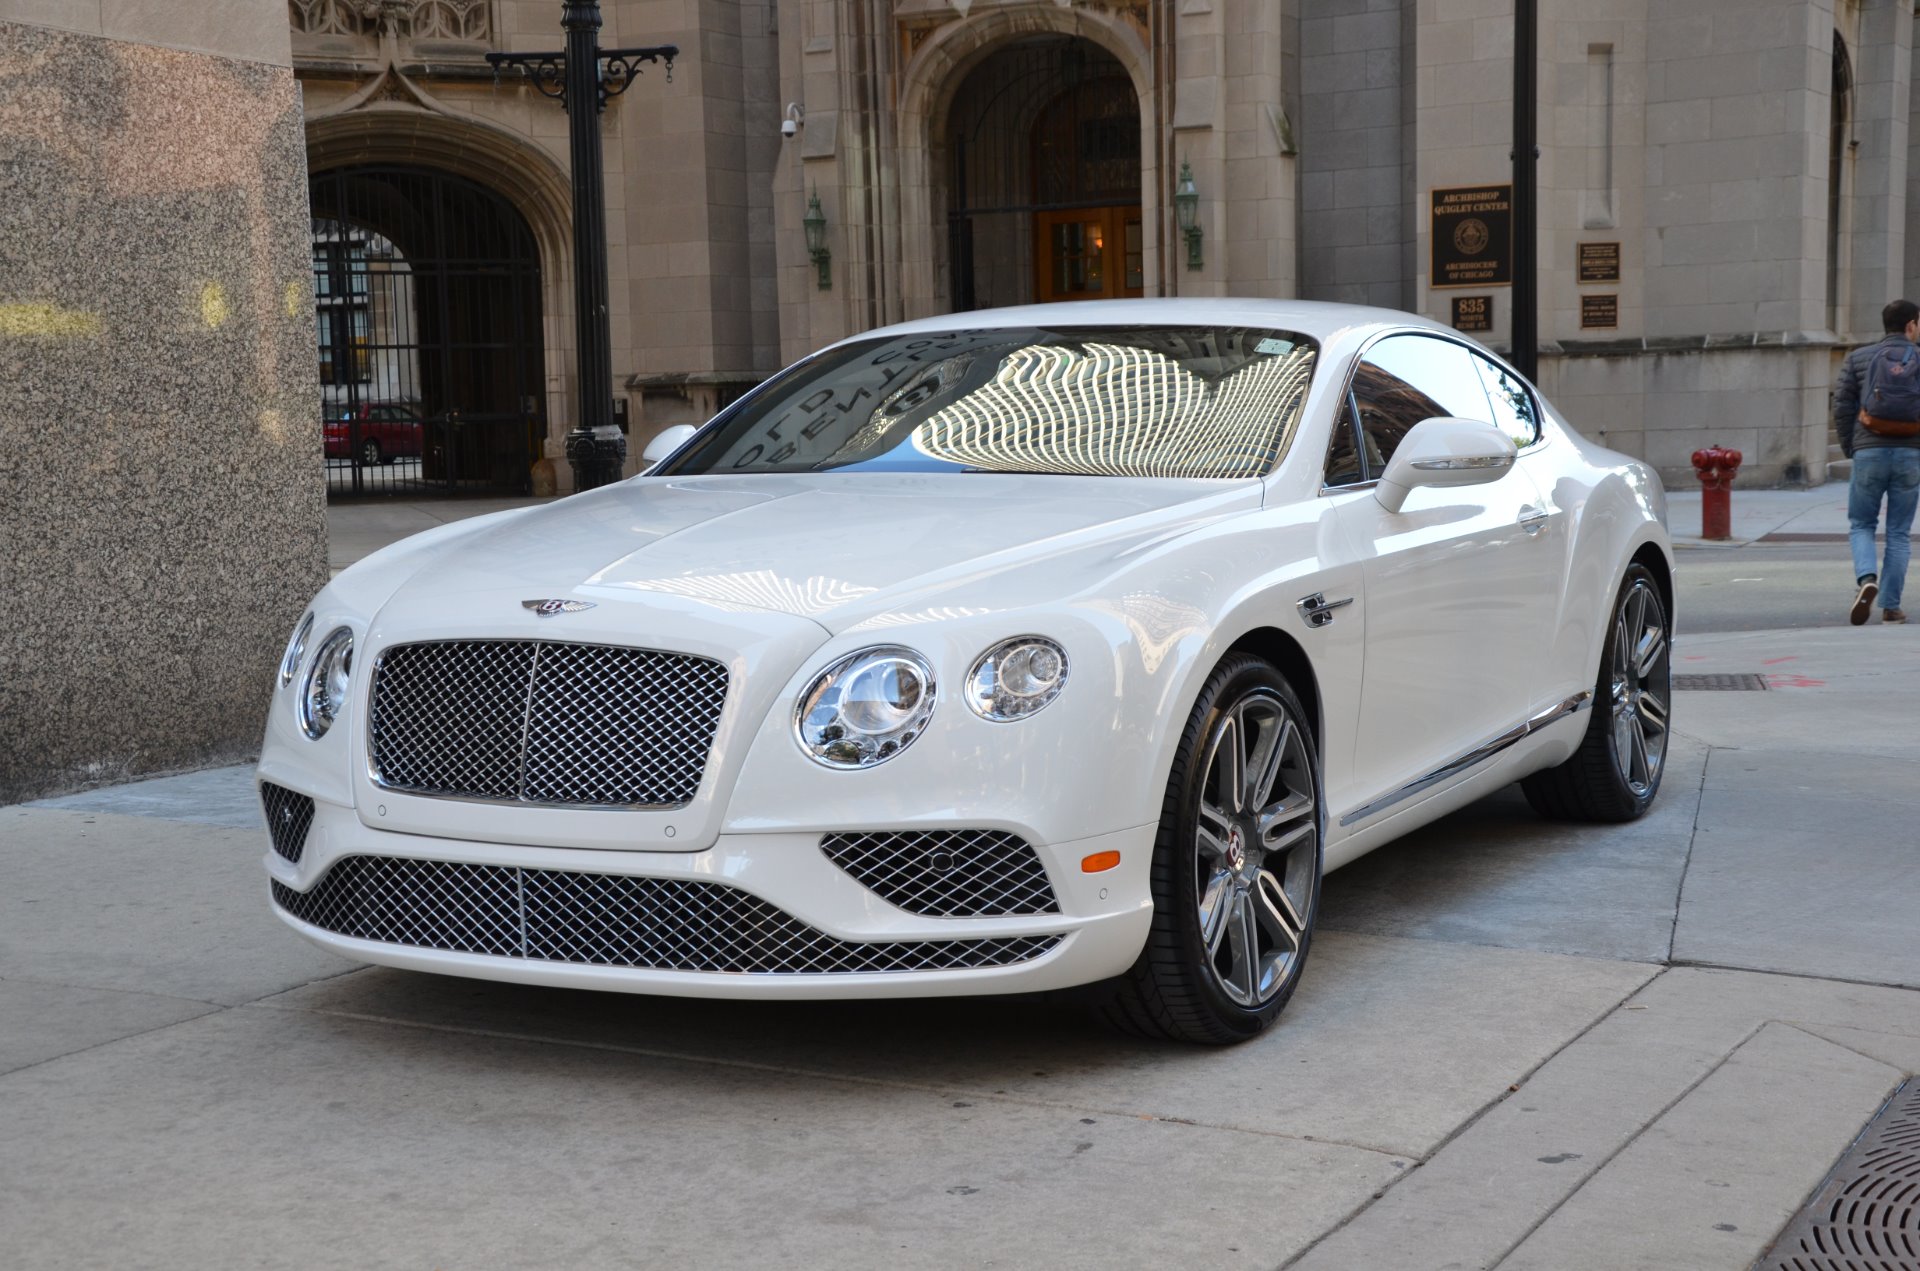 2017 Bentley Continental Gt V8 Stock B840 S For Sale Near Chicago Il